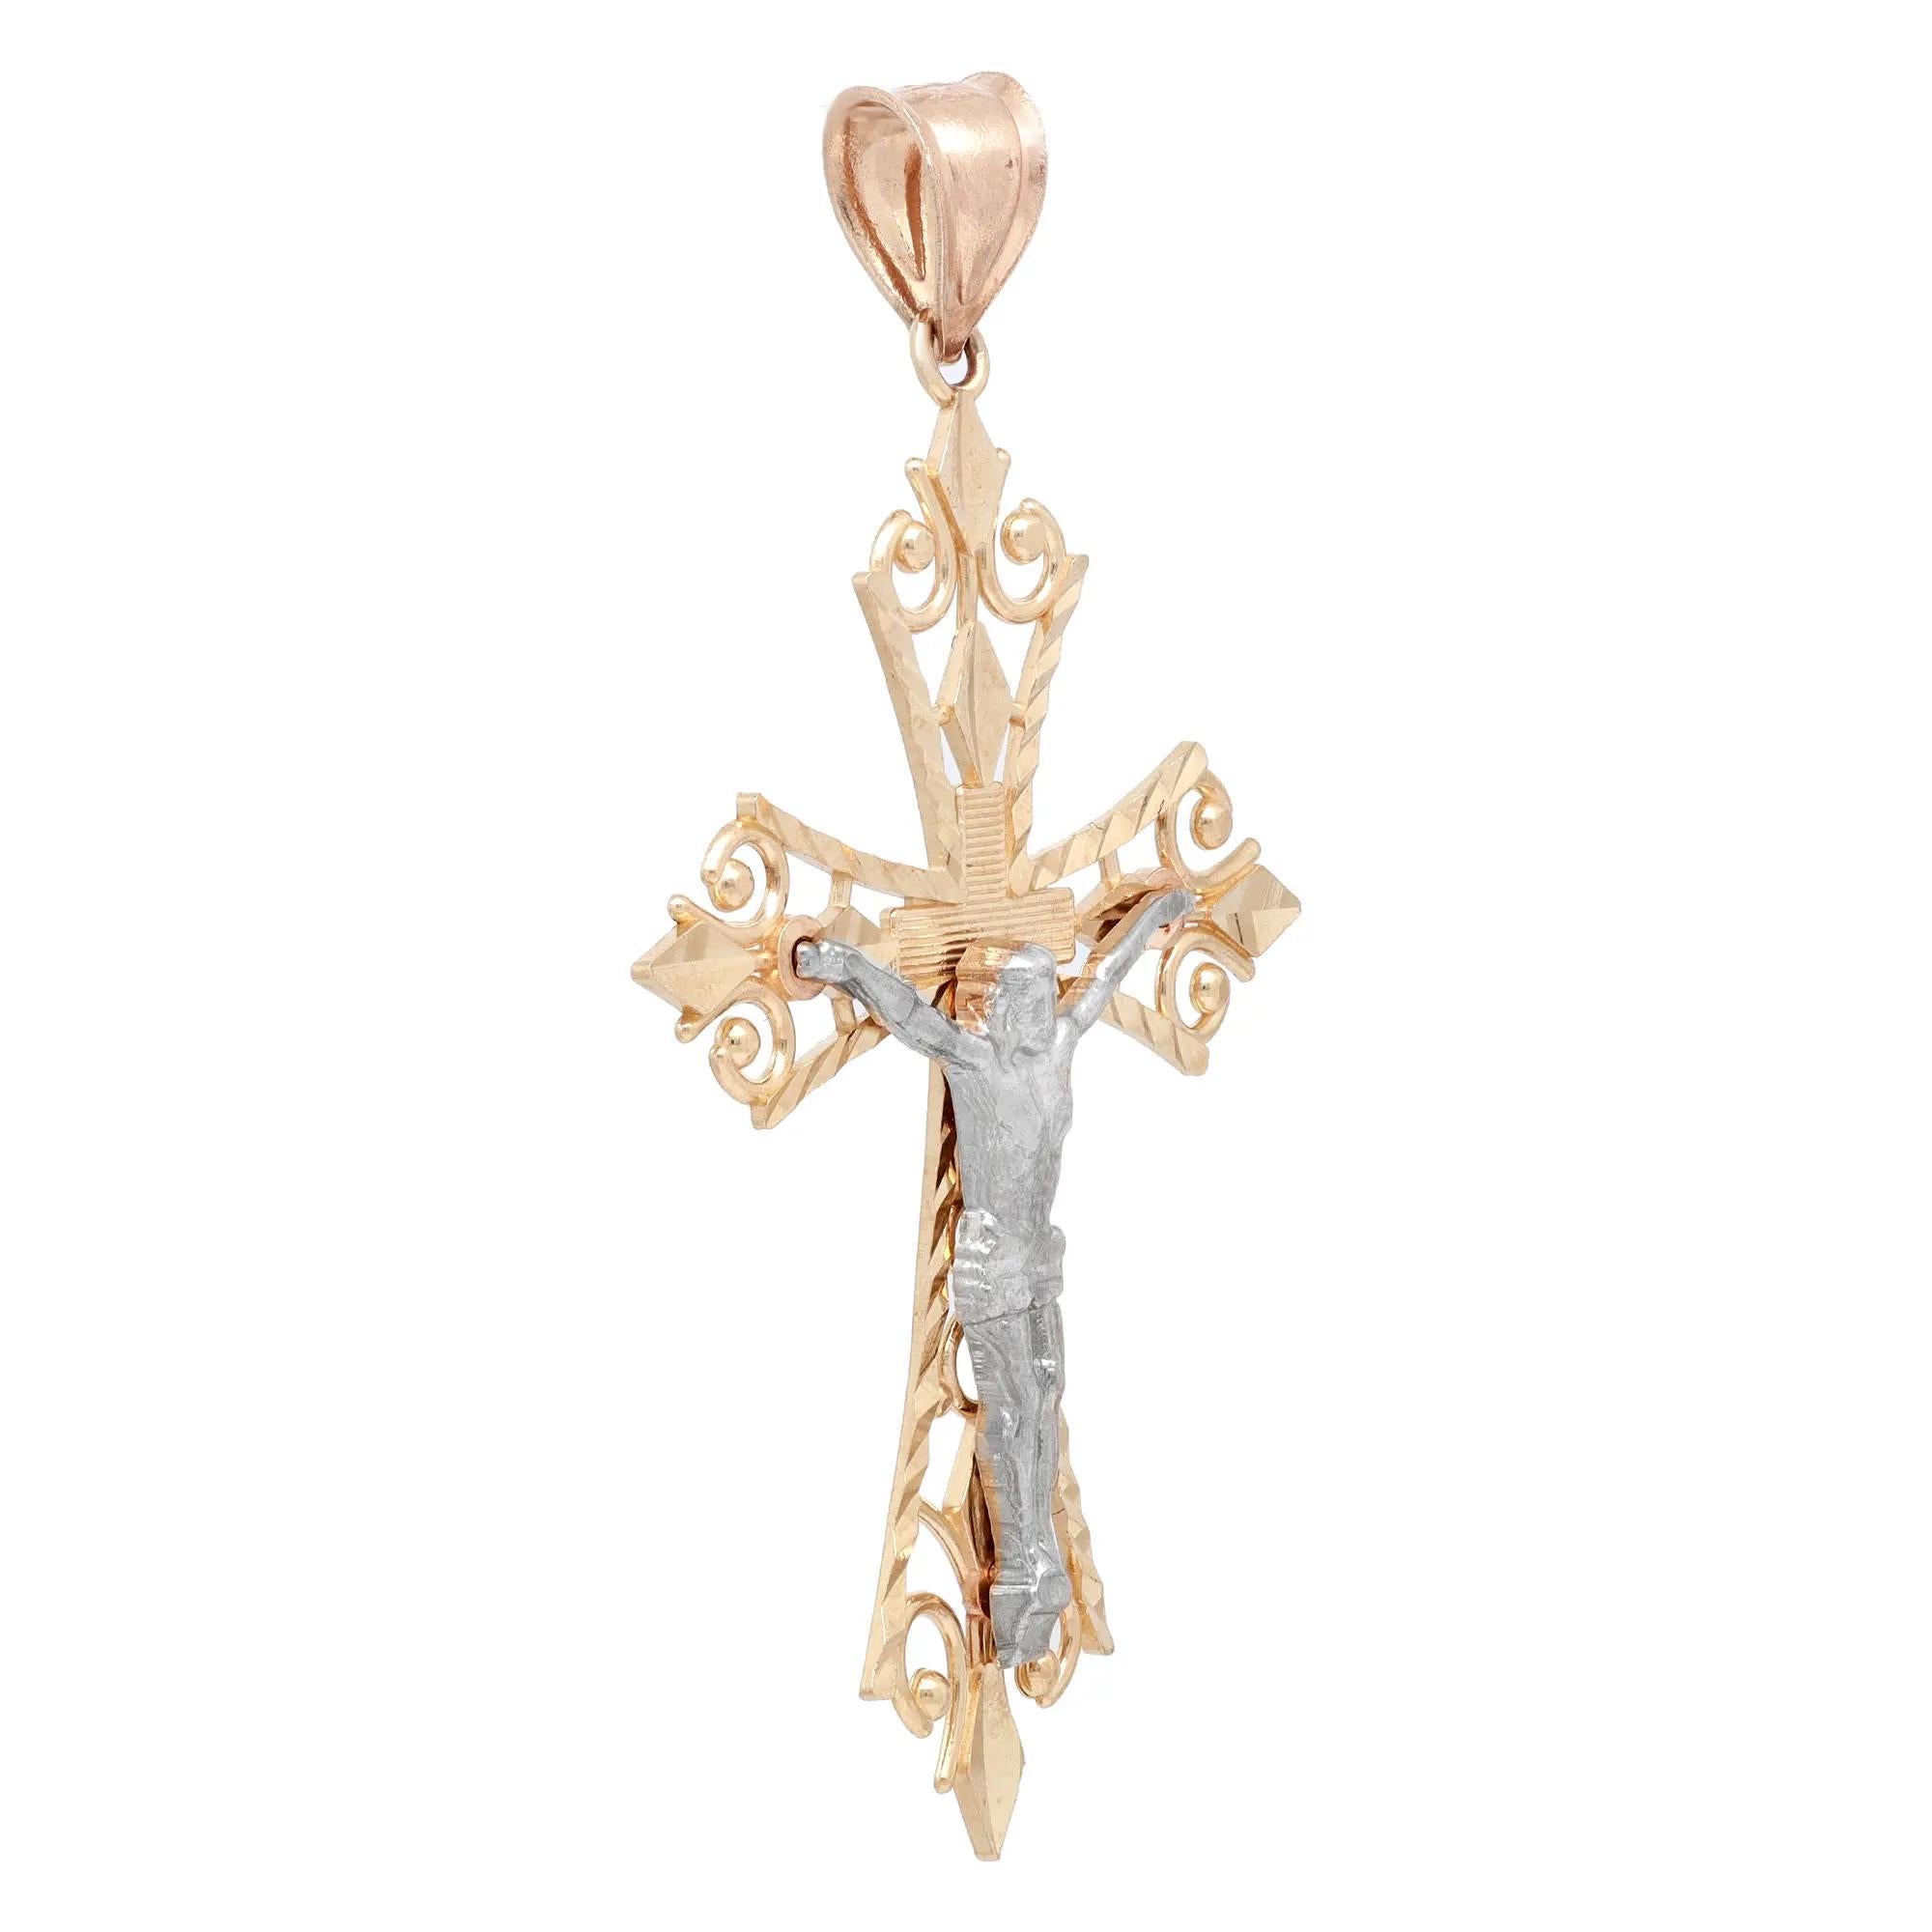 This meaningful cross pendant shines in lustrous 14K yellow and white gold. It features a crucifix filigree cross pendant in two tone gold. Pendant size: 2 inches x 1.2 inches. Total weight: 3.09 grams. Minimalist and stylish, perfect for everyday